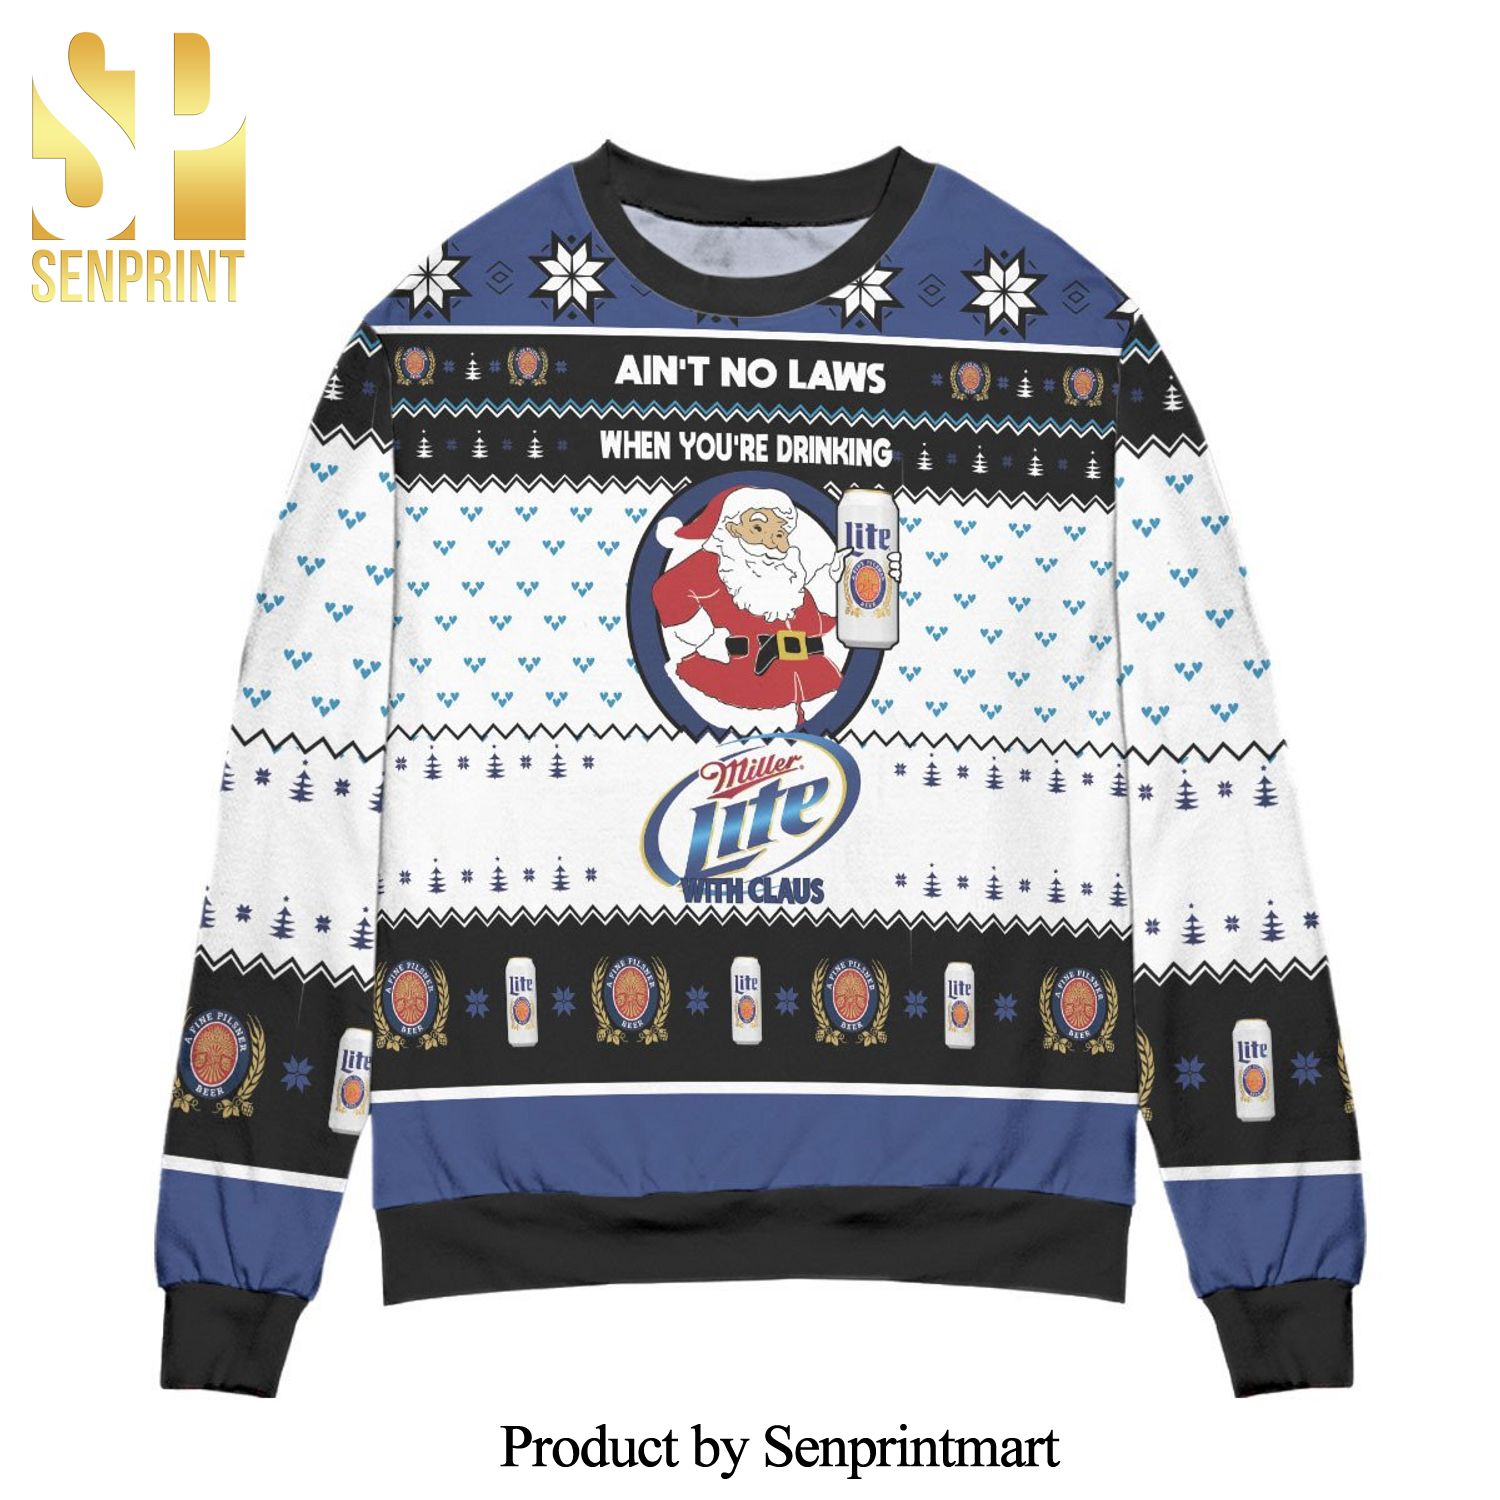 Ain’t No Laws When You’re Drinking Miller Lite With Claus Knitted Ugly Christmas Sweater – White Blue